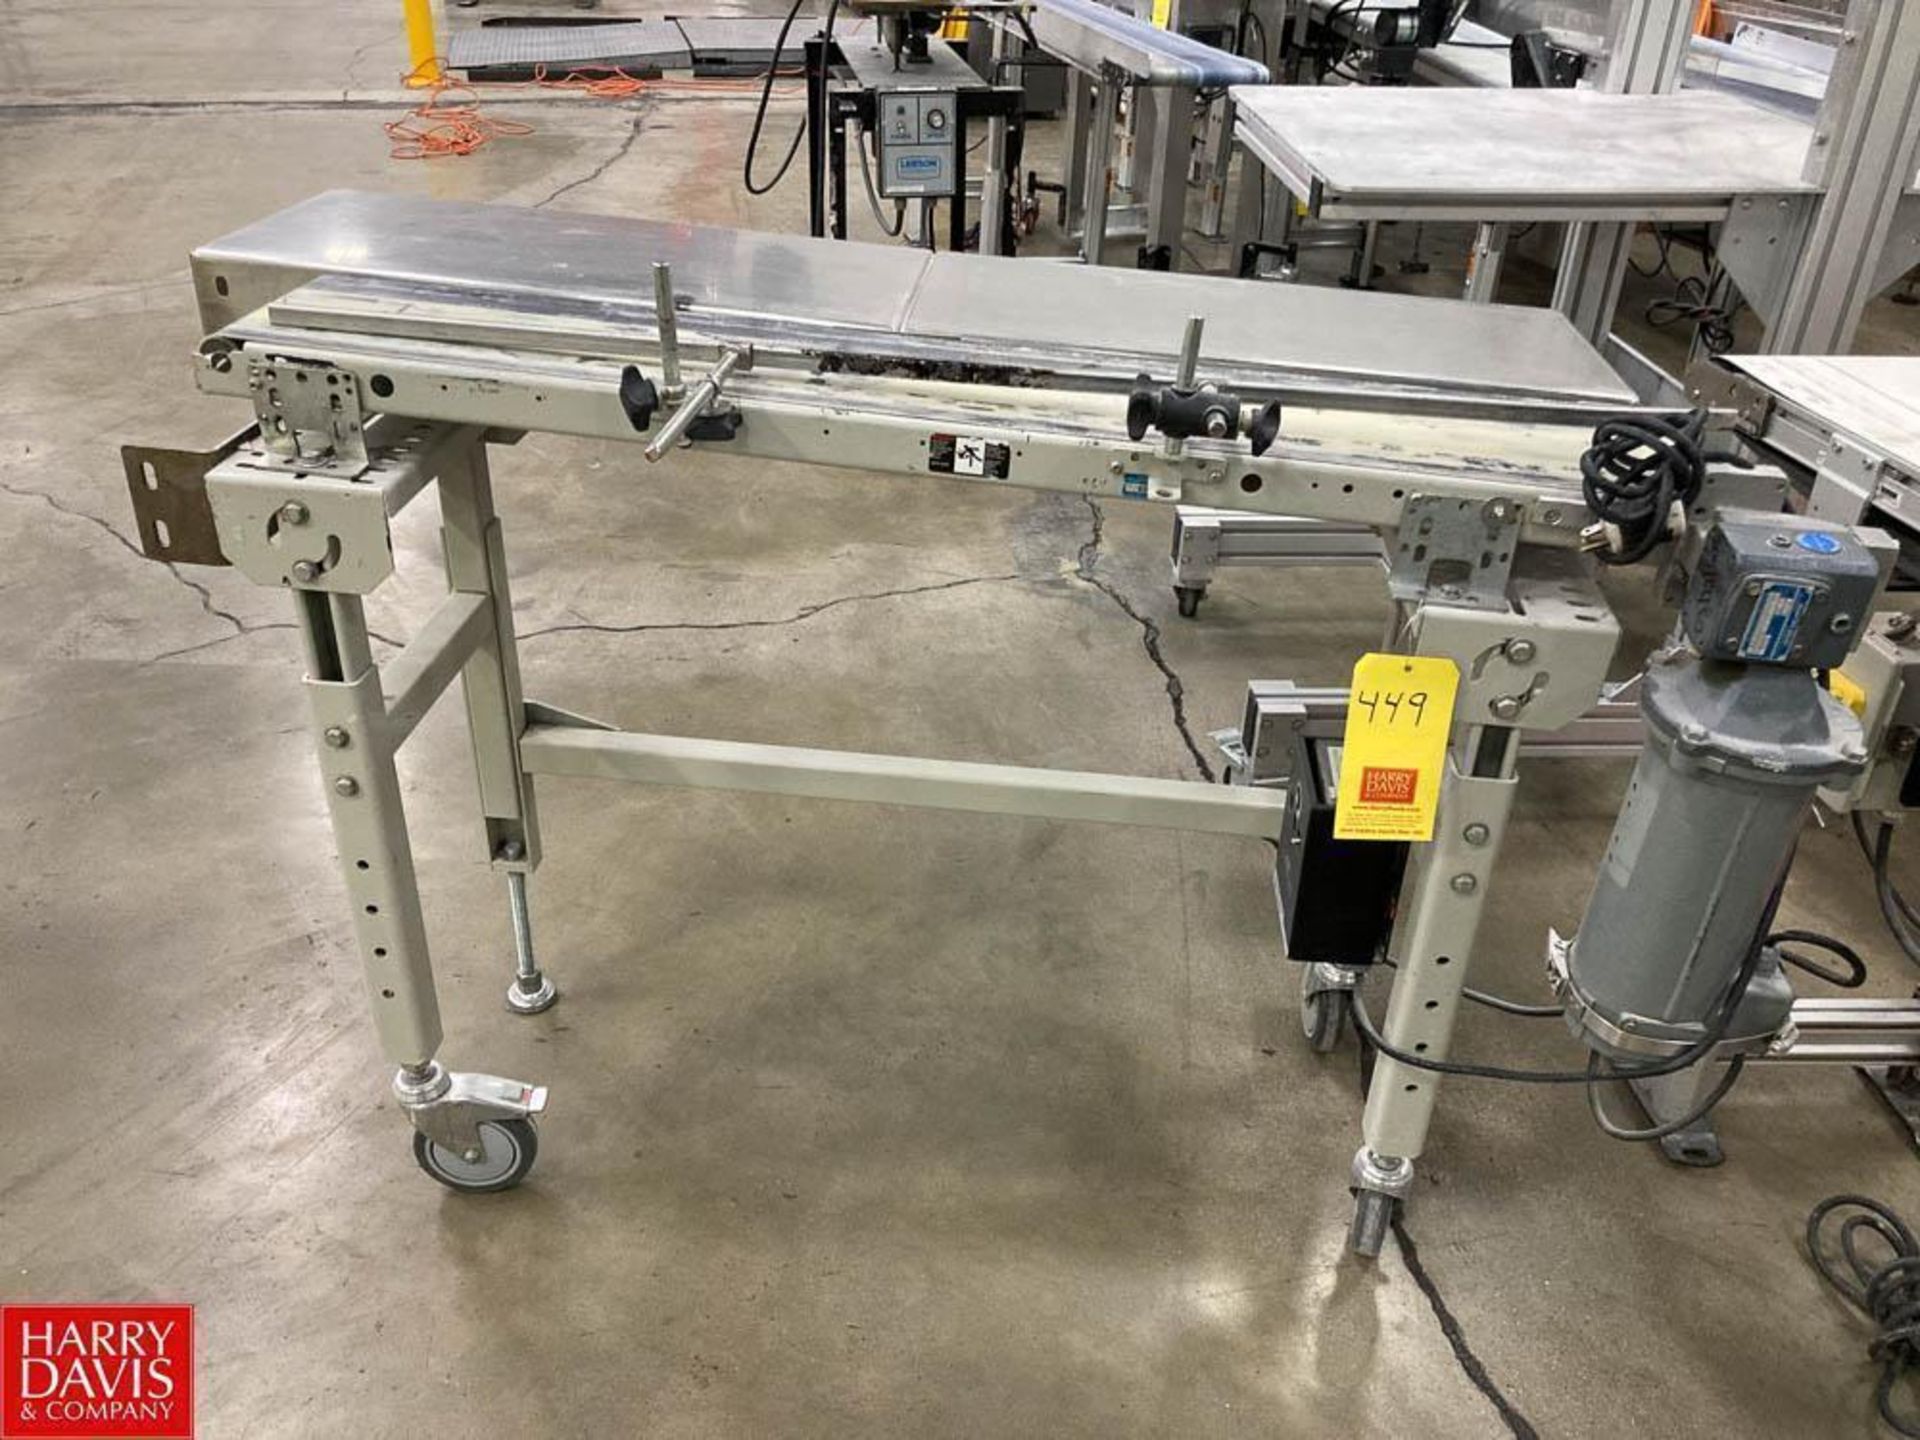 Conveyor, Asset #: 0564, Dimensions = 4' x 2' - Rigging Fee: $125 - Image 2 of 2